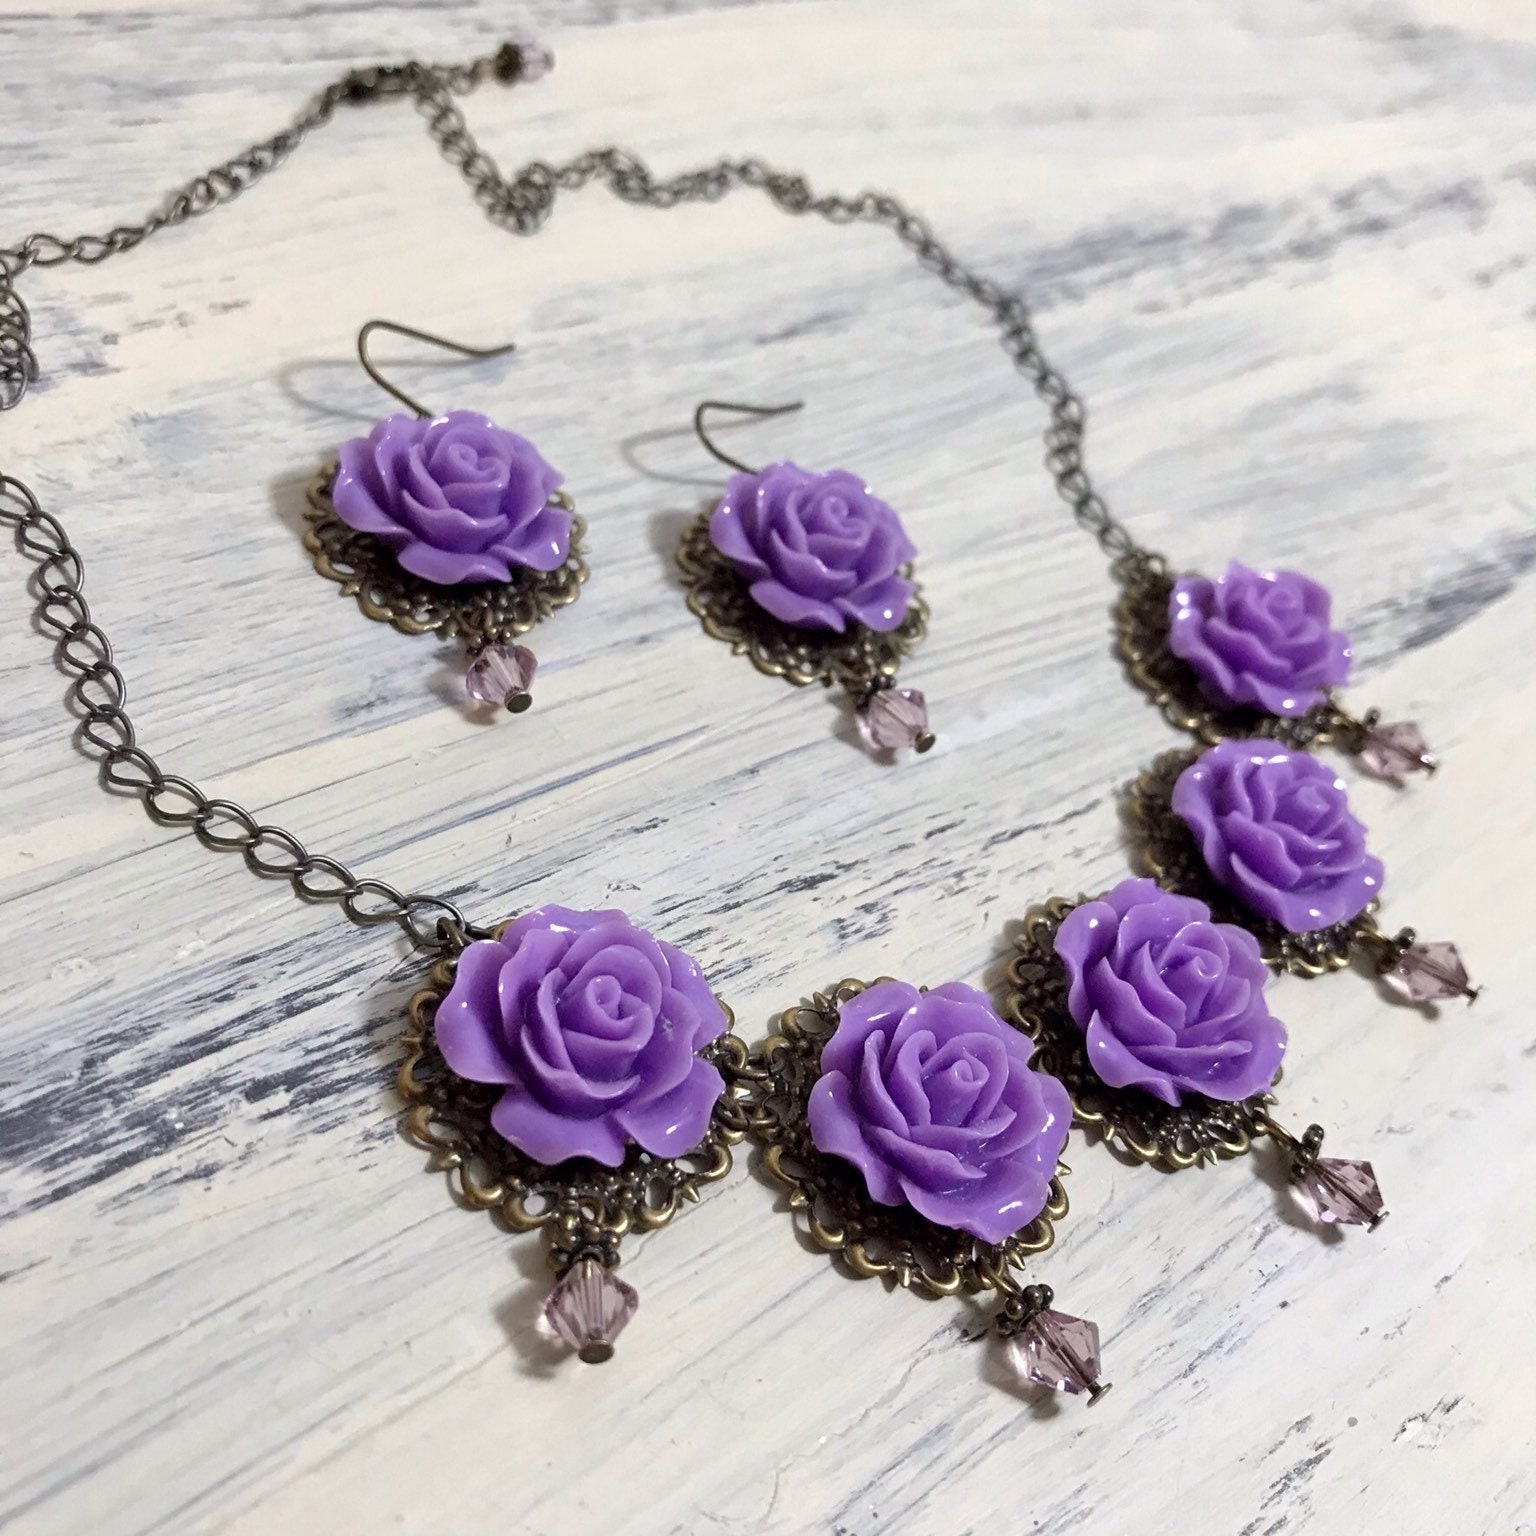 Buy Bright Purple Rose Pendant Simple Rose Necklace Purple Rose Necklace  Bridesmaid, Wedding Jewelry Polymer Clay MADE to ORDER Online in India -  Etsy